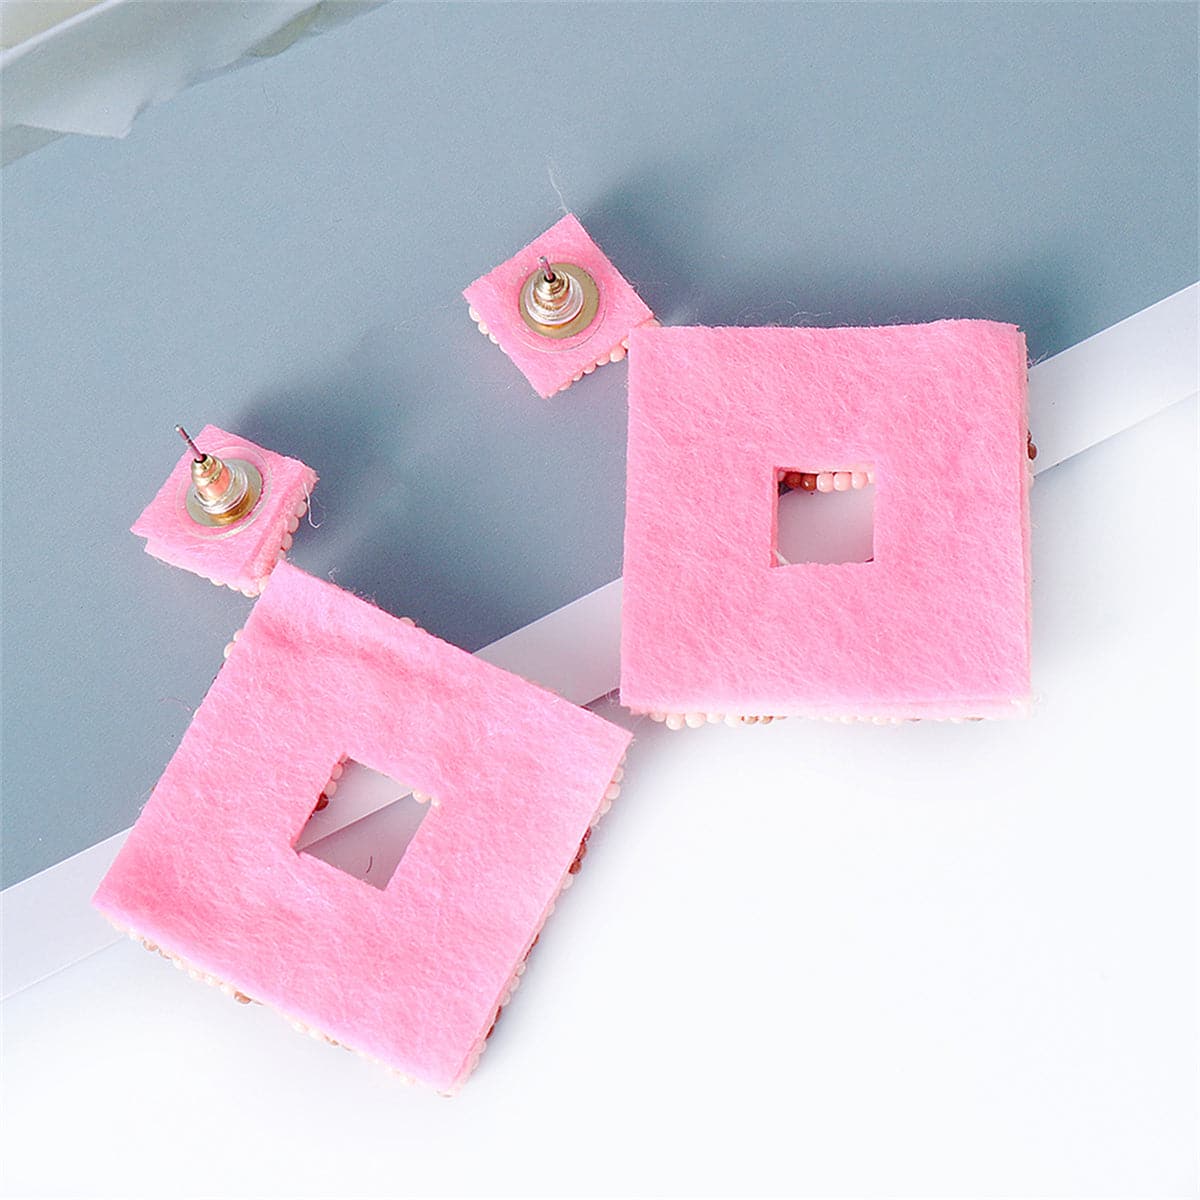 Pink & White Howlite Open Square Drop Earrings